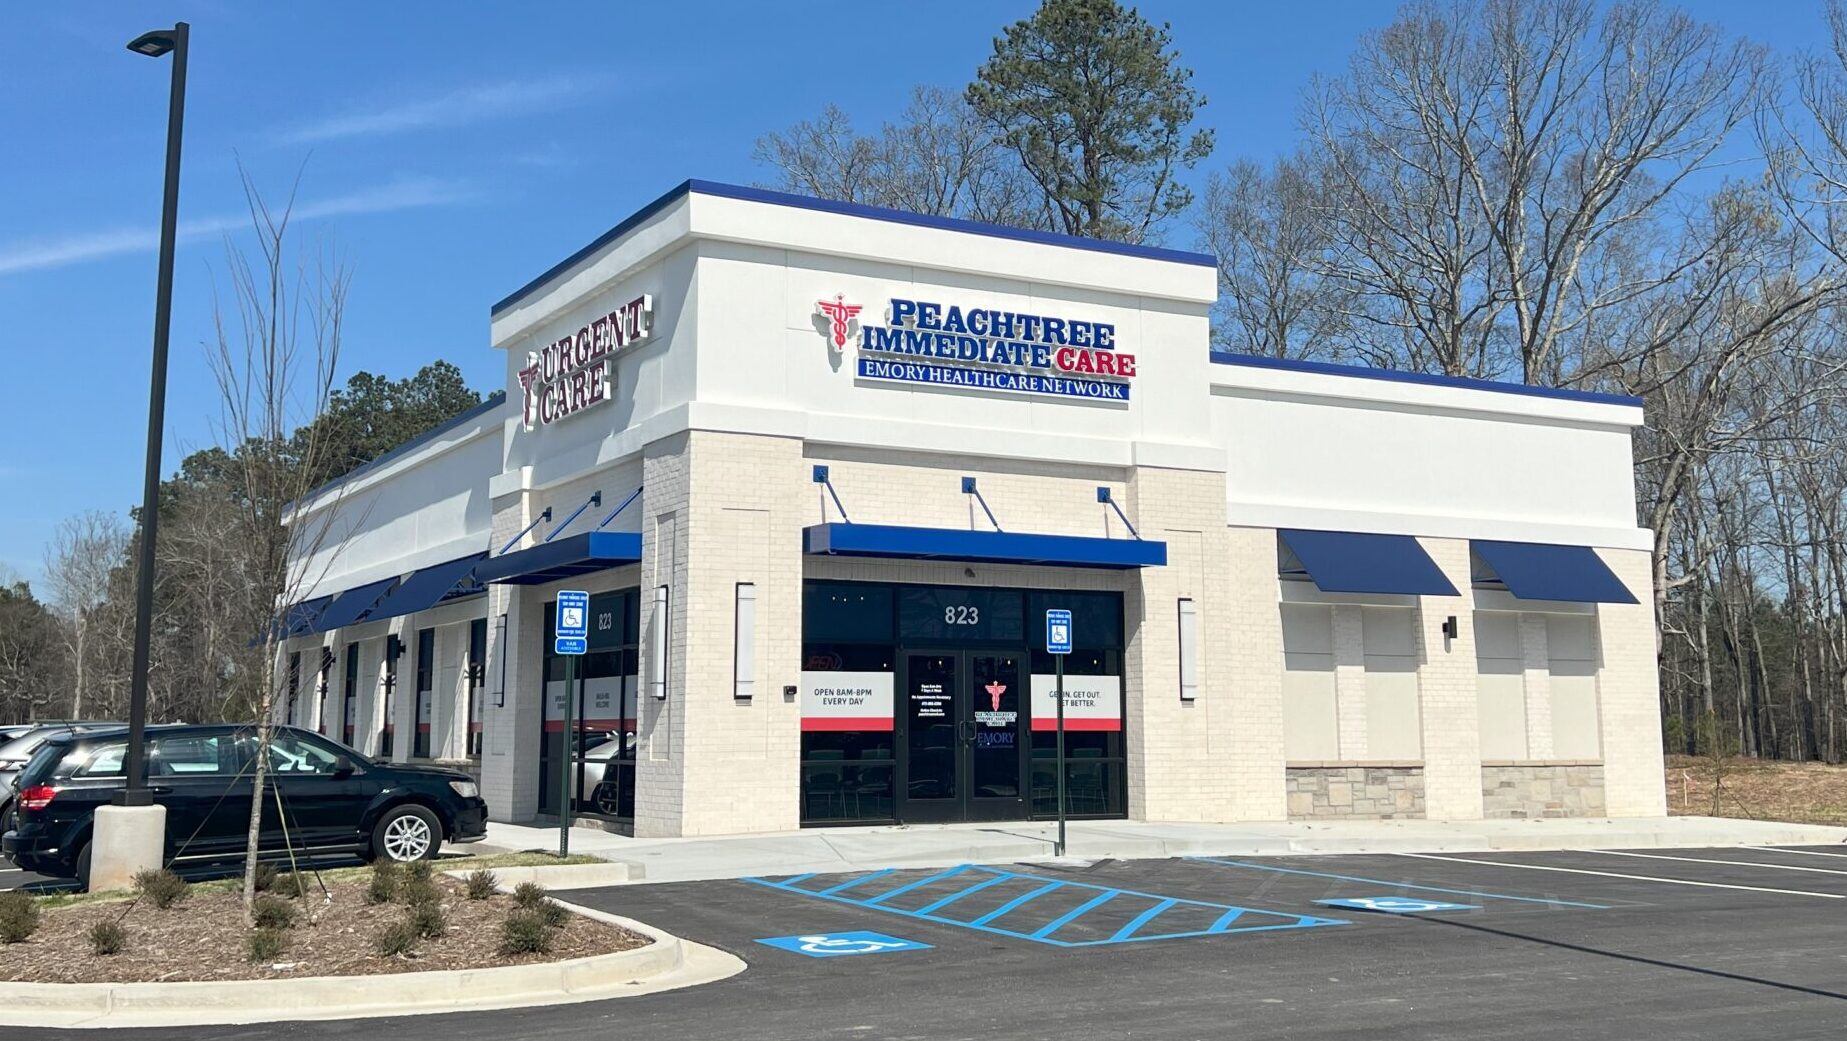 An exterior photo of the Peachtree Immediate Care Bethlehem location.